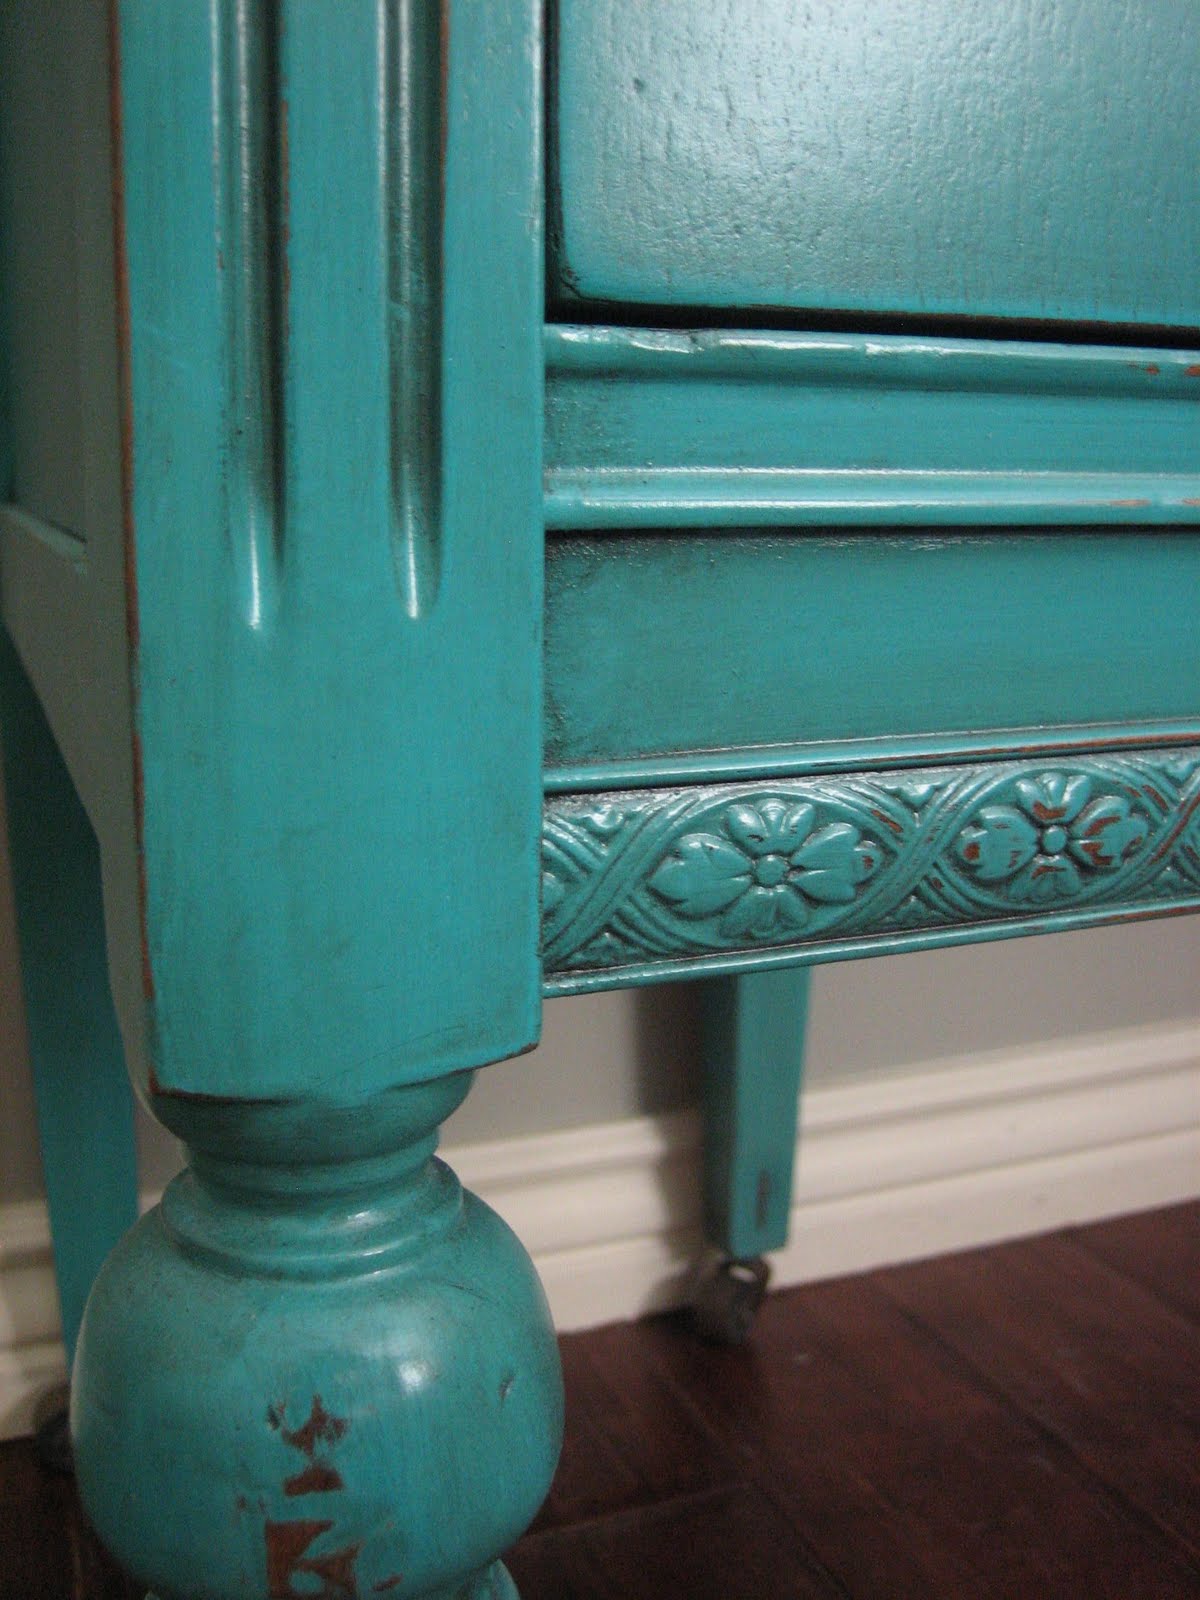 European Paint Finishes: ~ Turquoise/Teal & Cream Bedroom Set